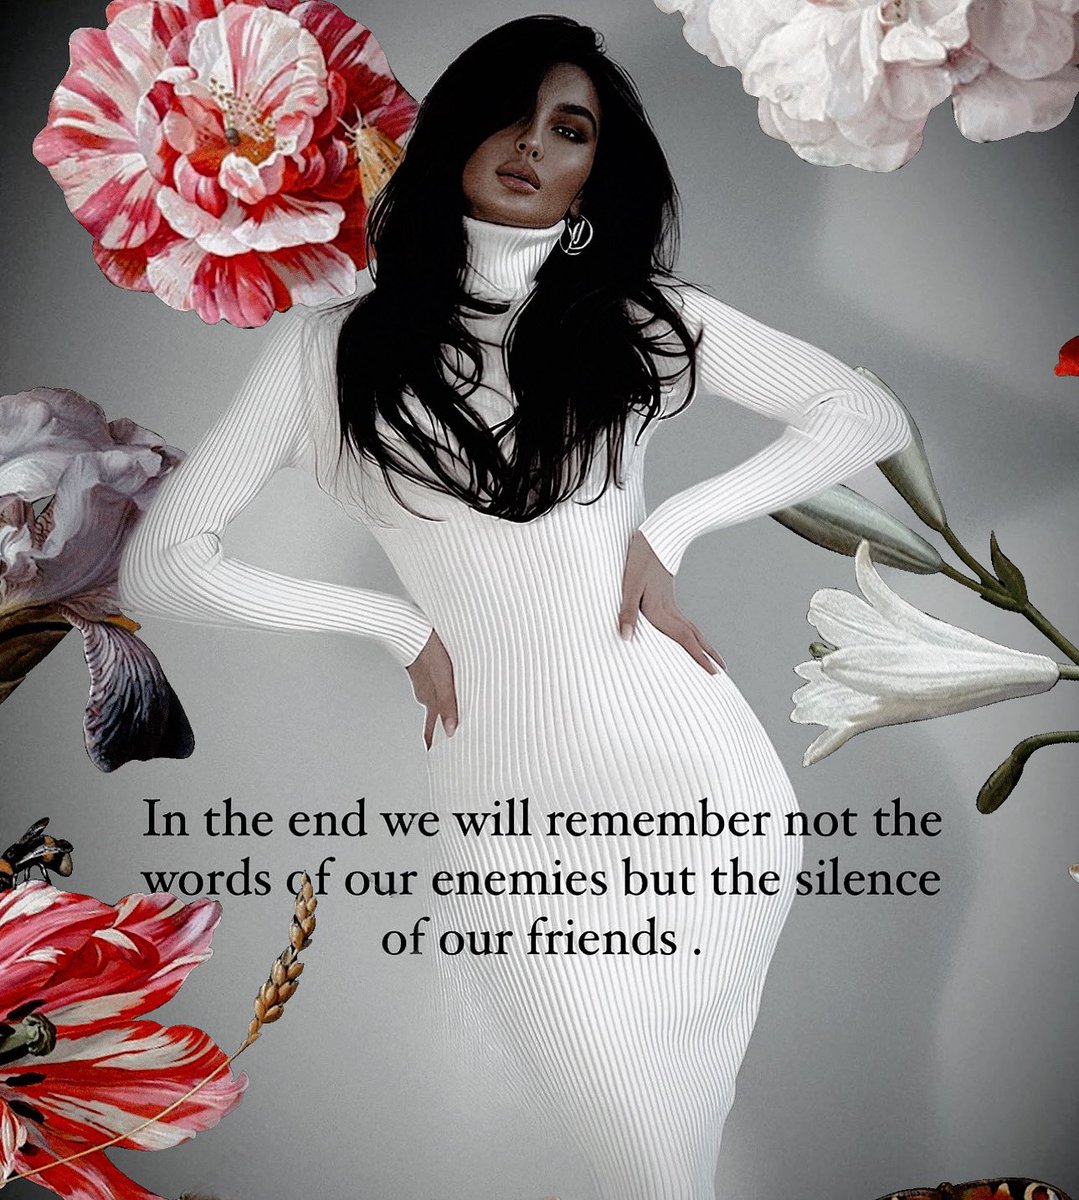 In the end we will remember not the words of our enemies but the silence of our friends. 🤍

#SpringEquinox